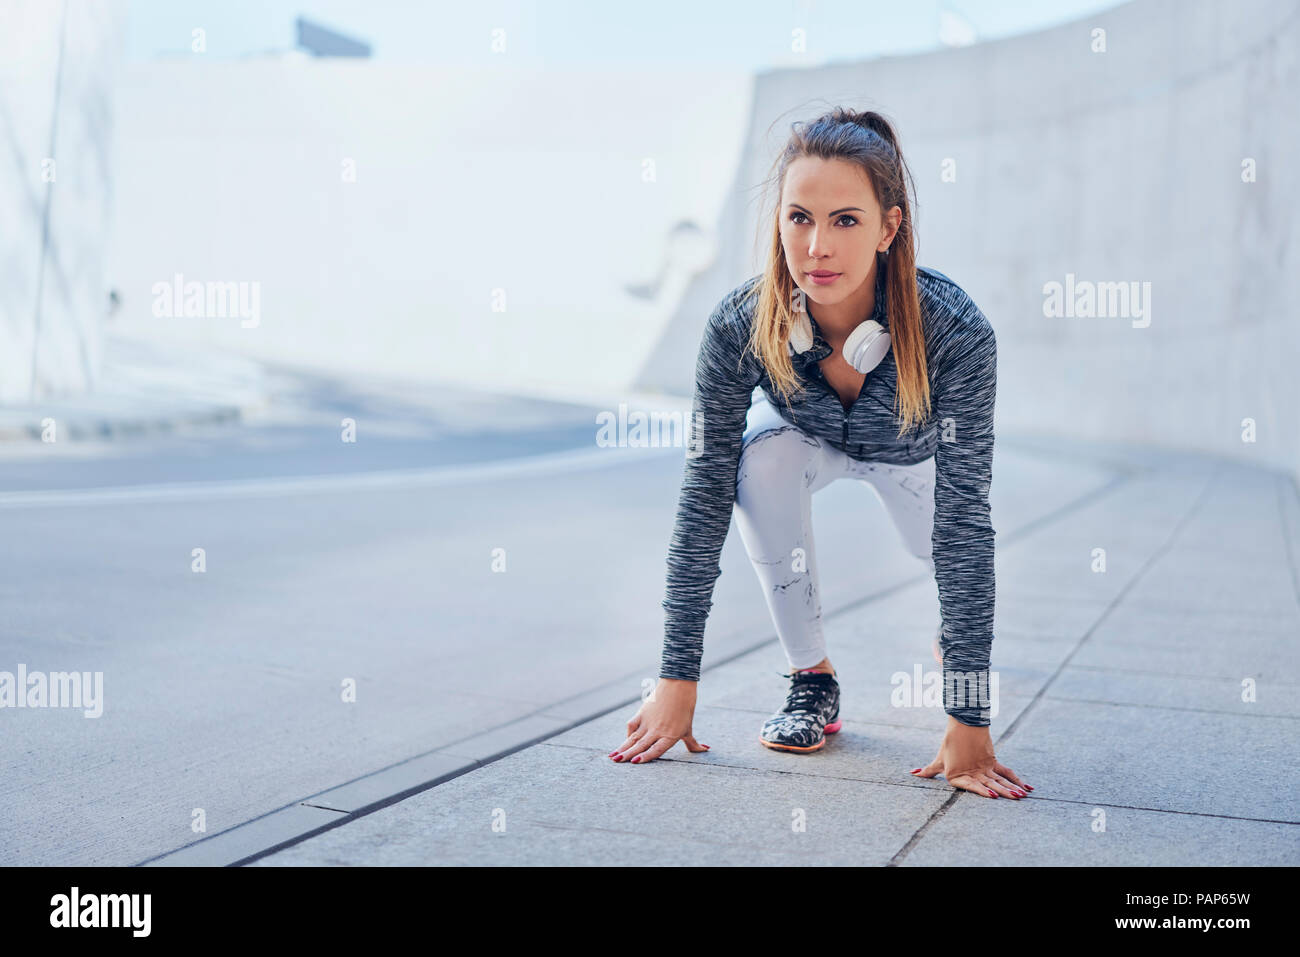 Woman stretching leg after jogging Stock Photo